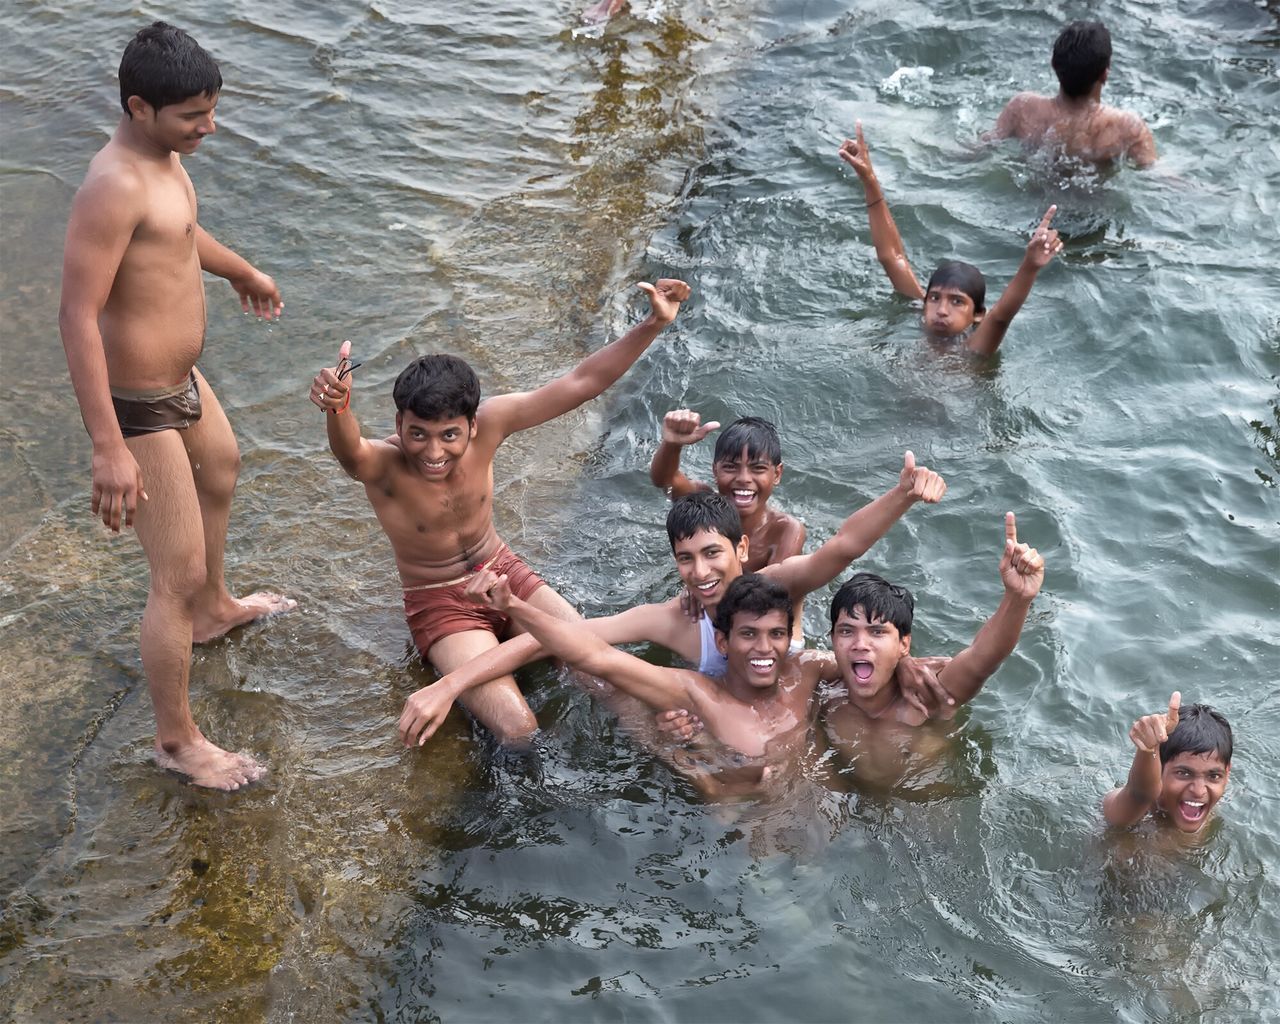 water, swimming, leisure activity, lifestyles, togetherness, waterfront, enjoyment, fun, high angle view, happiness, lake, childhood, rippled, vacations, boys, girls, full length, day